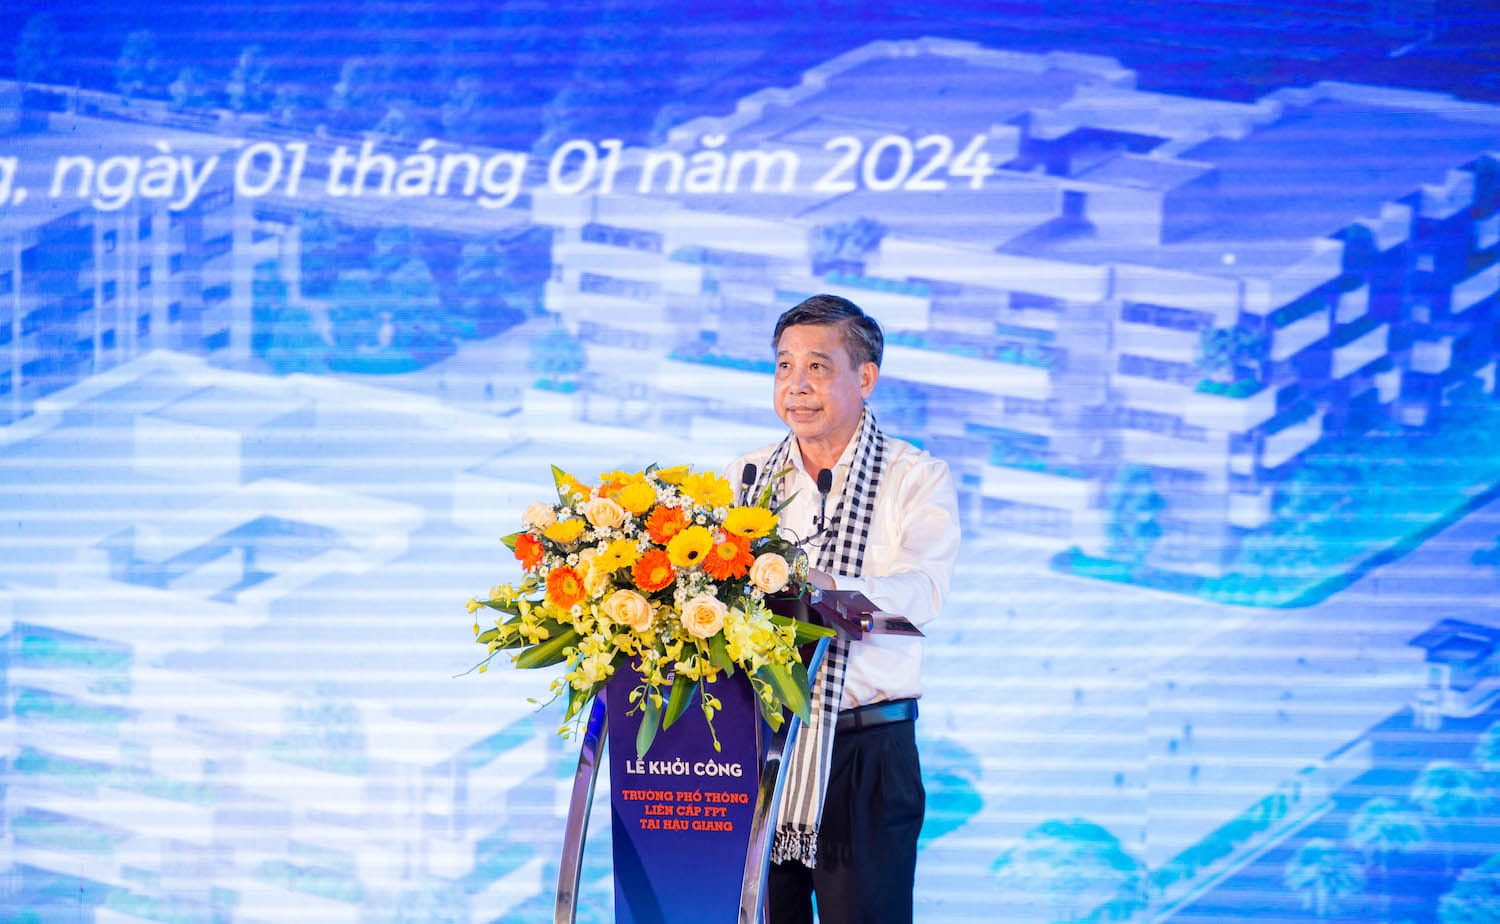 Chairman of Hau Giang Provincial People's Committee Dong Van Thanh spoke at the ceremony